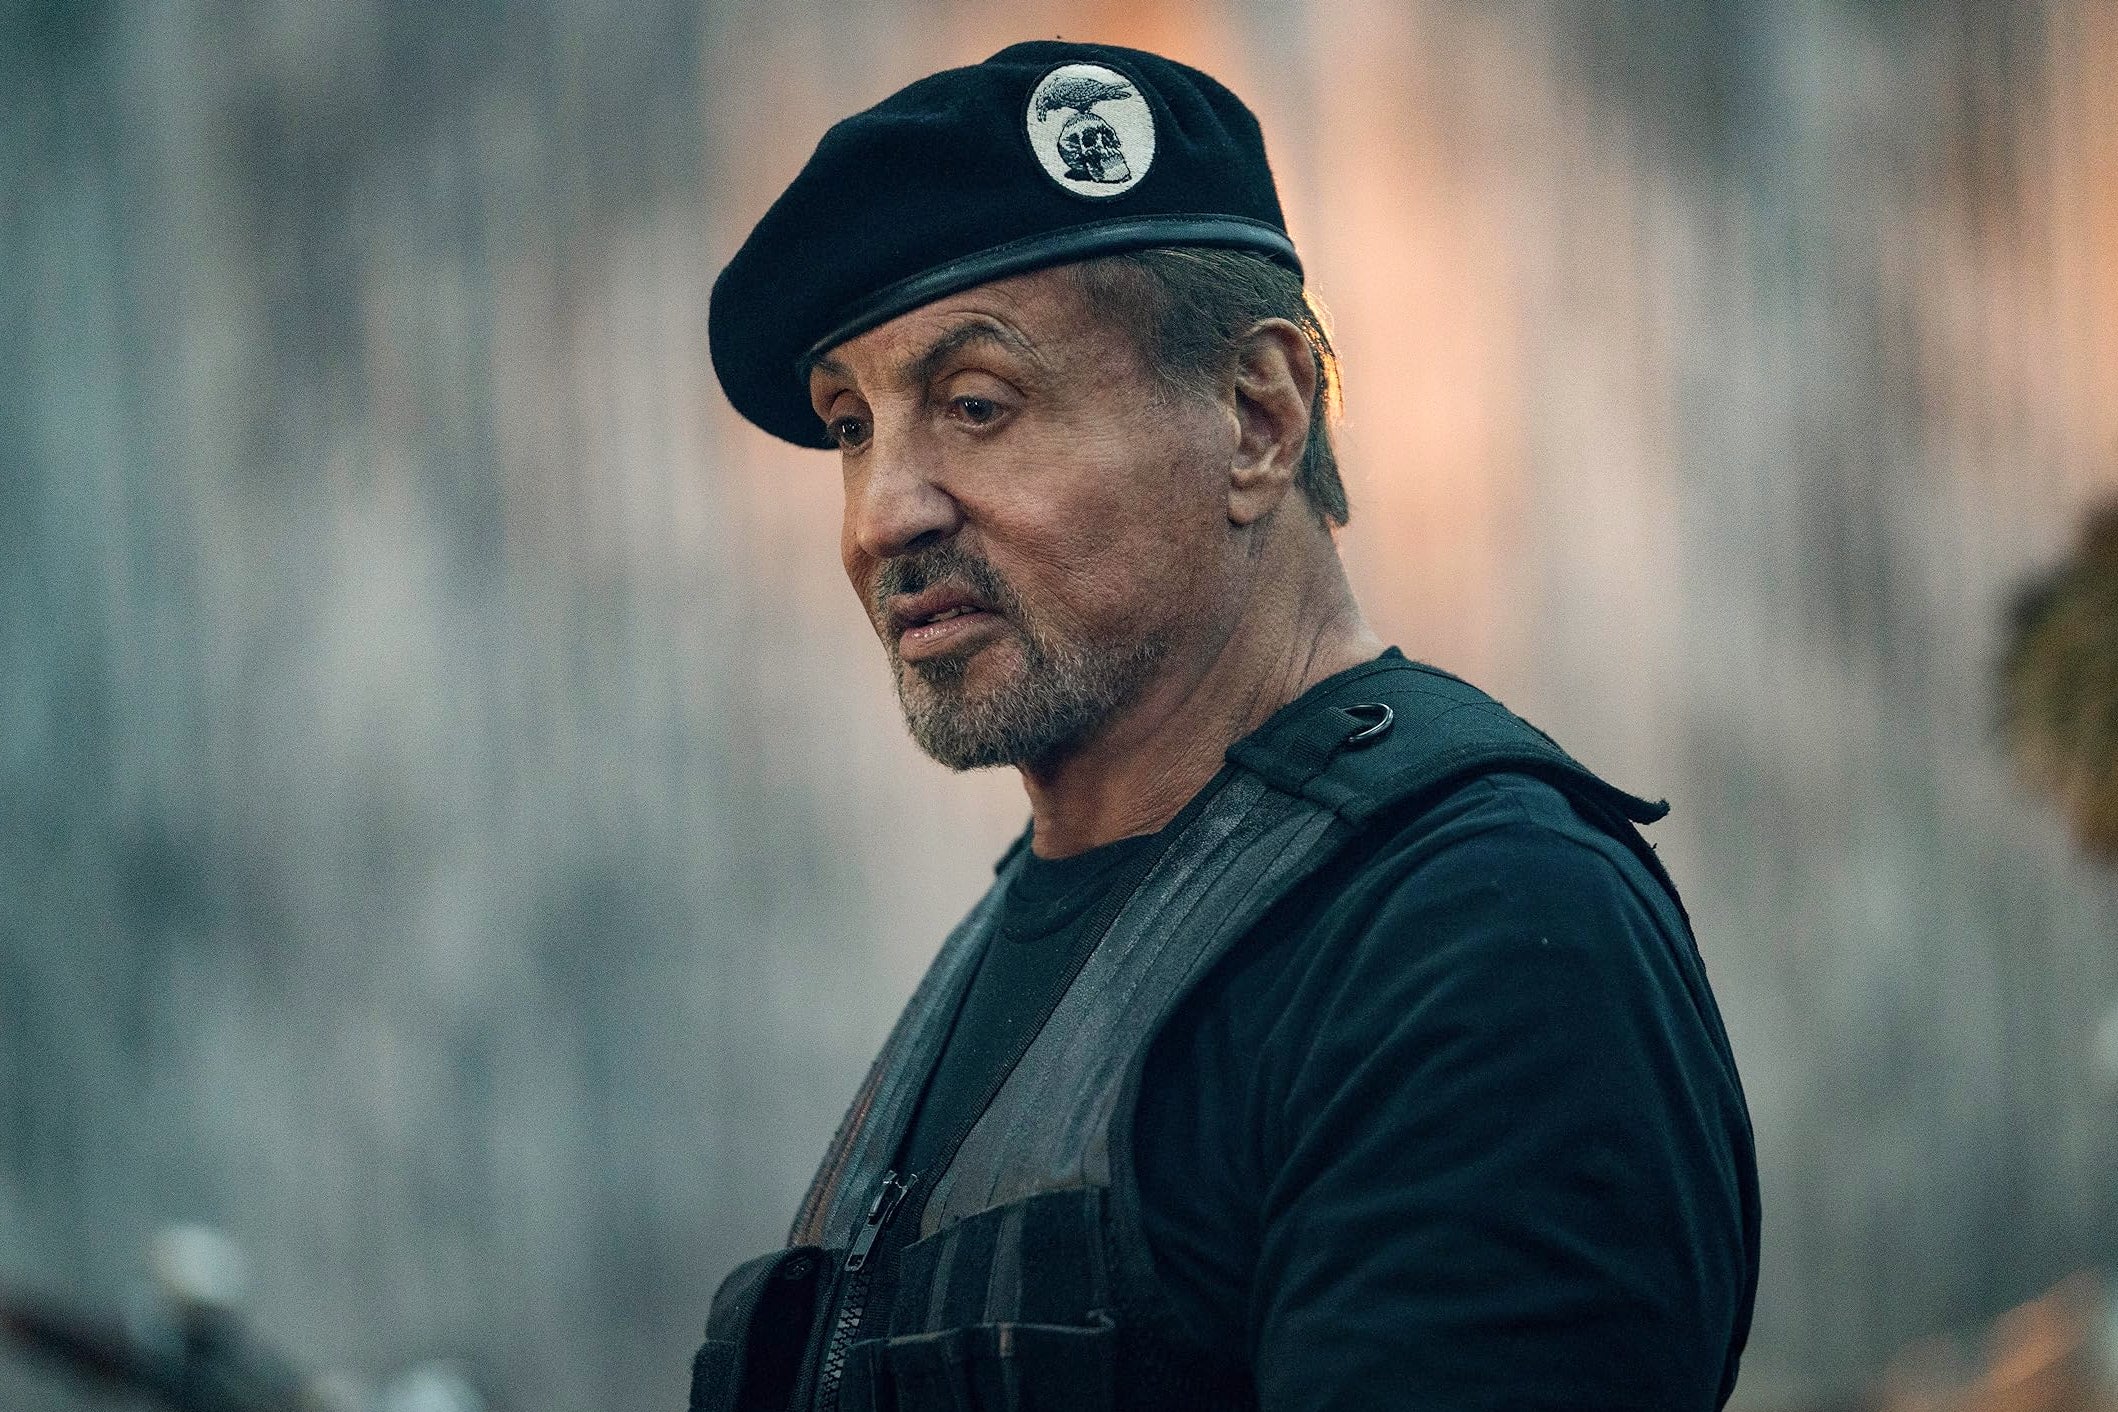 Sylvester Stallone wearing a beret in character in The Expendables. 